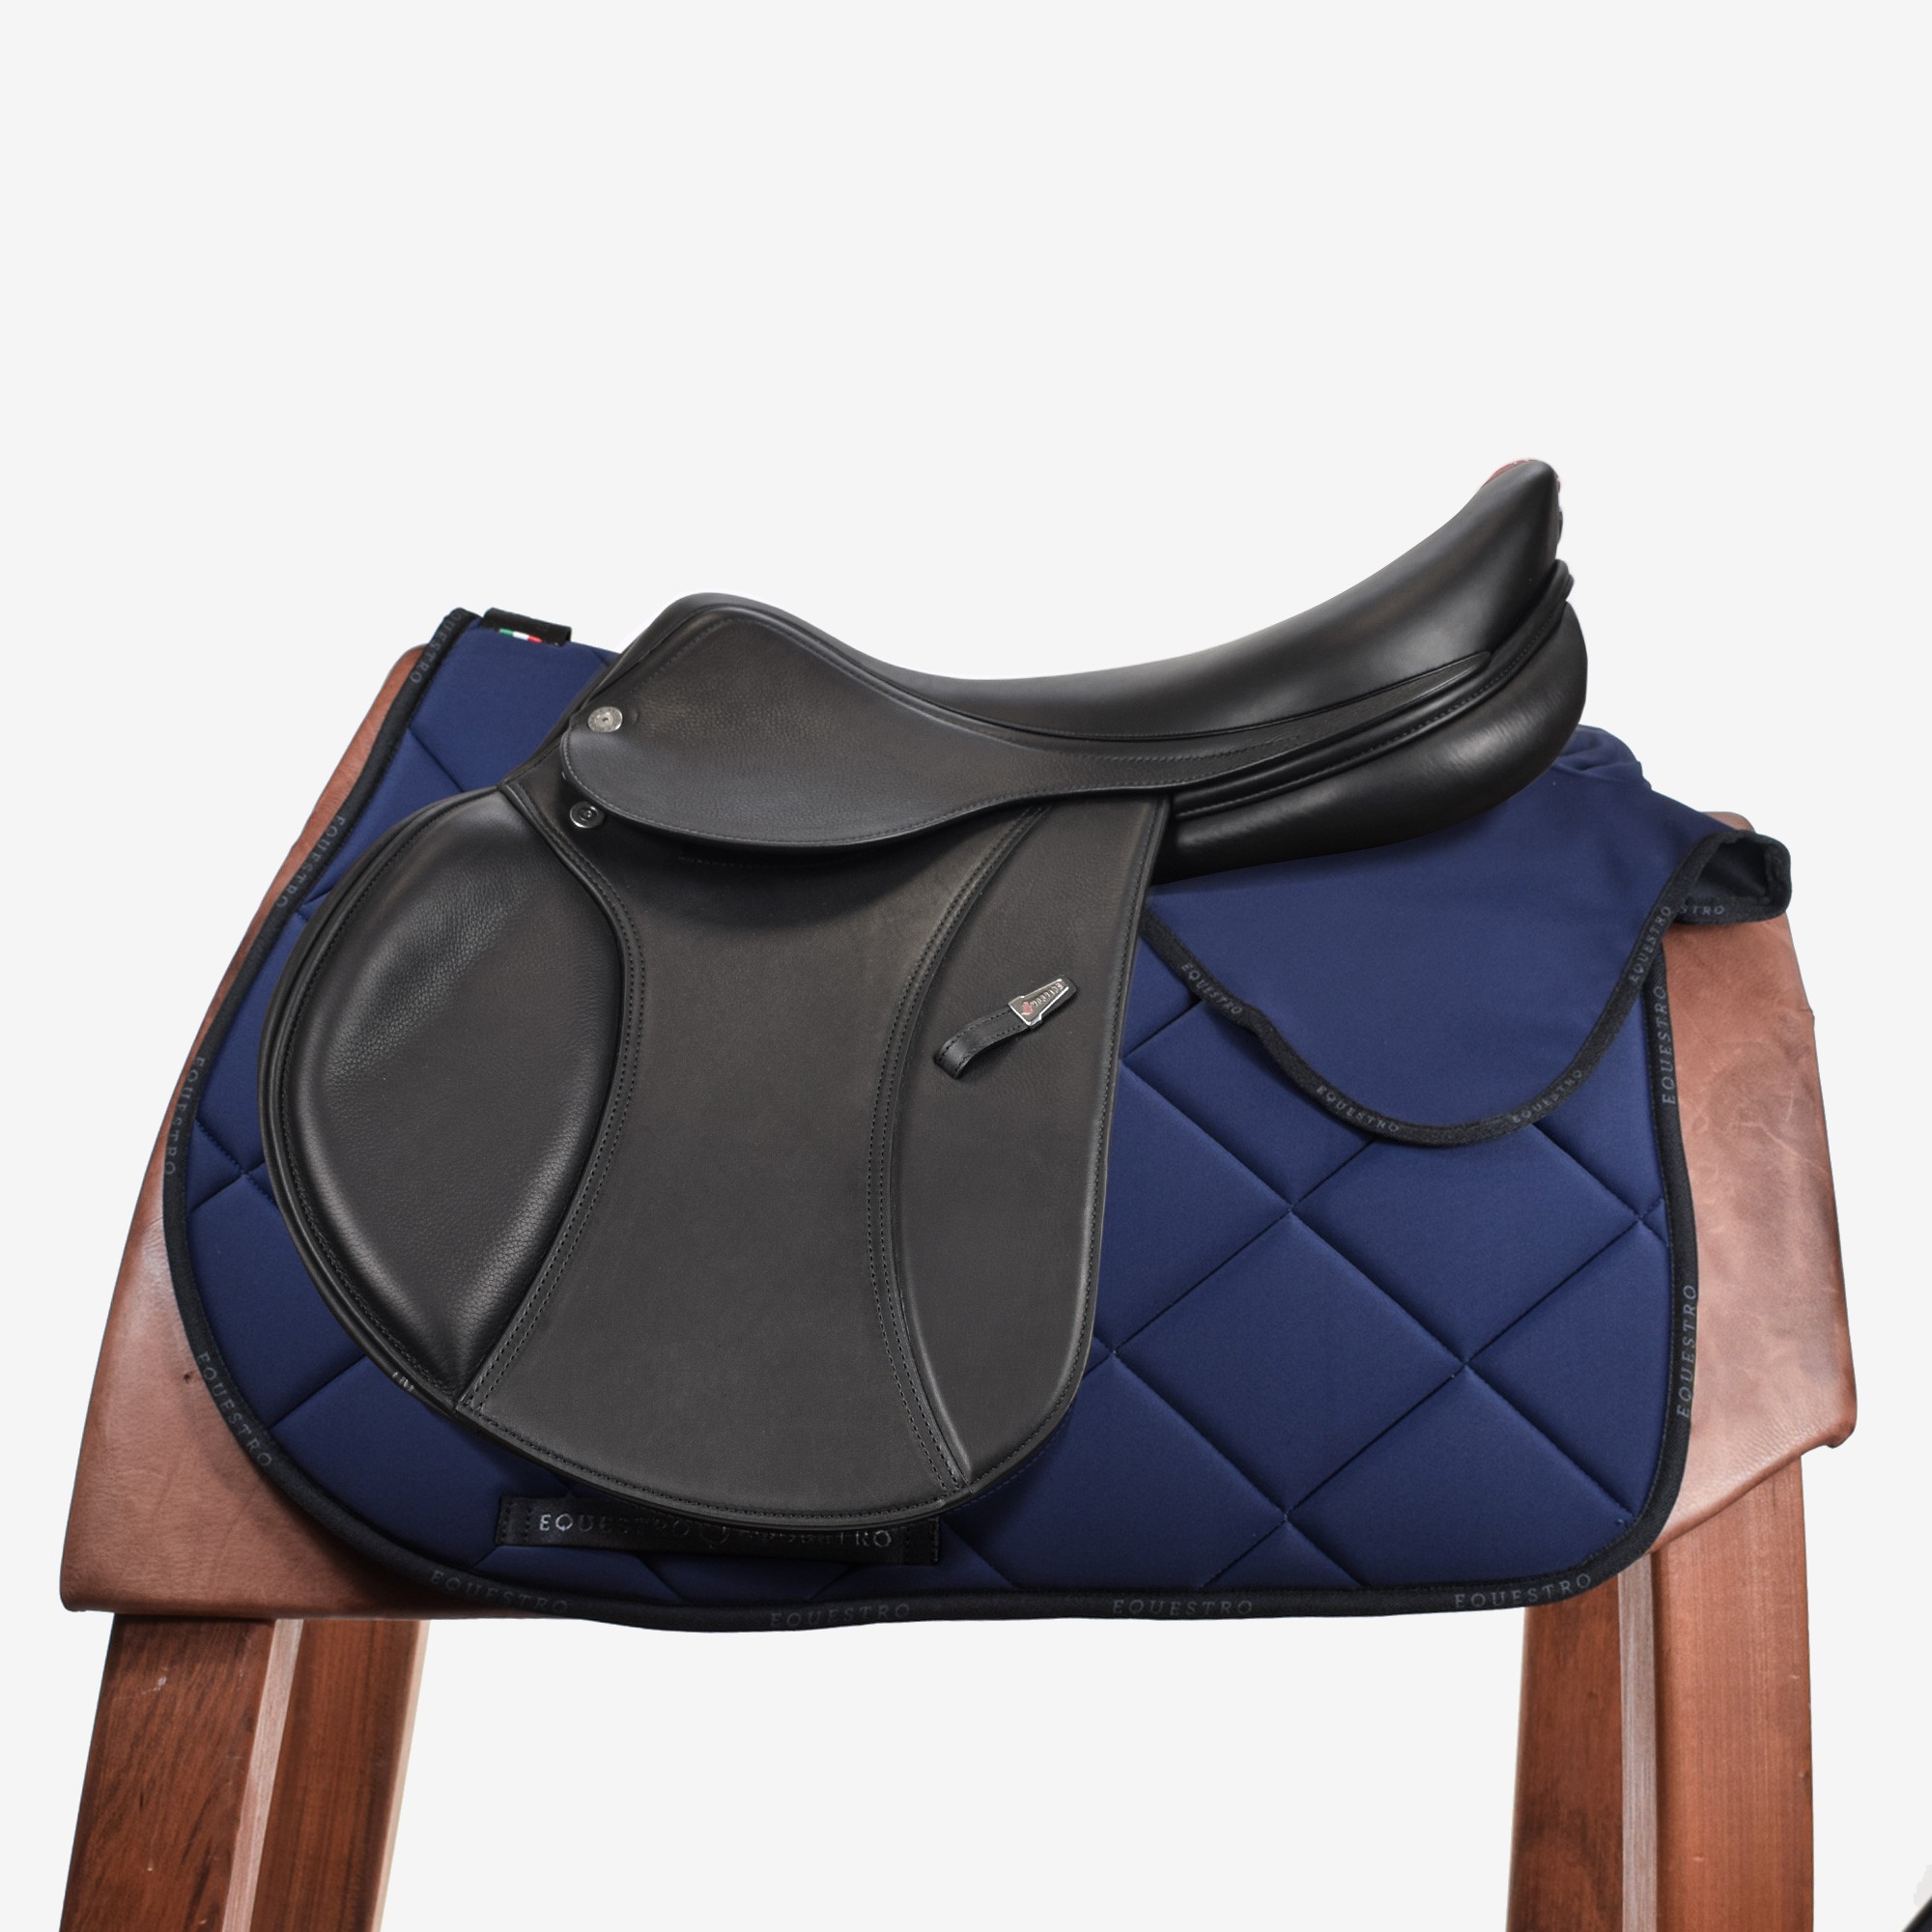 Saddlepad Equestro - LE SELLE - Horse riding at the right price